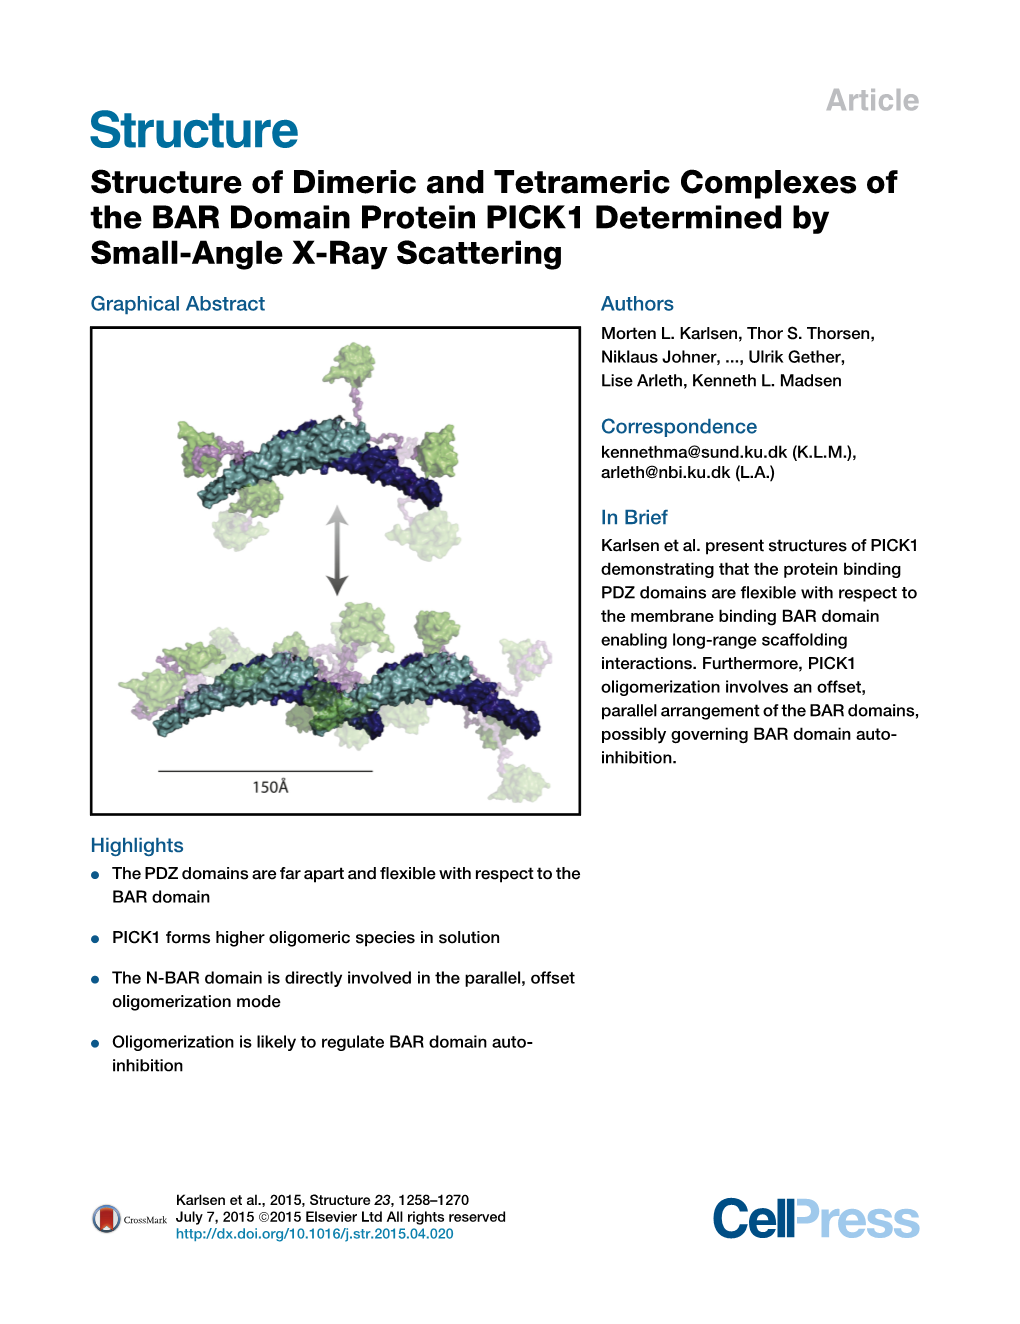 Structure of Dimeric and Tetrameric Complexes of the BAR Domain Protein PICK1 Determined by Small-Angle X-Ray Scattering